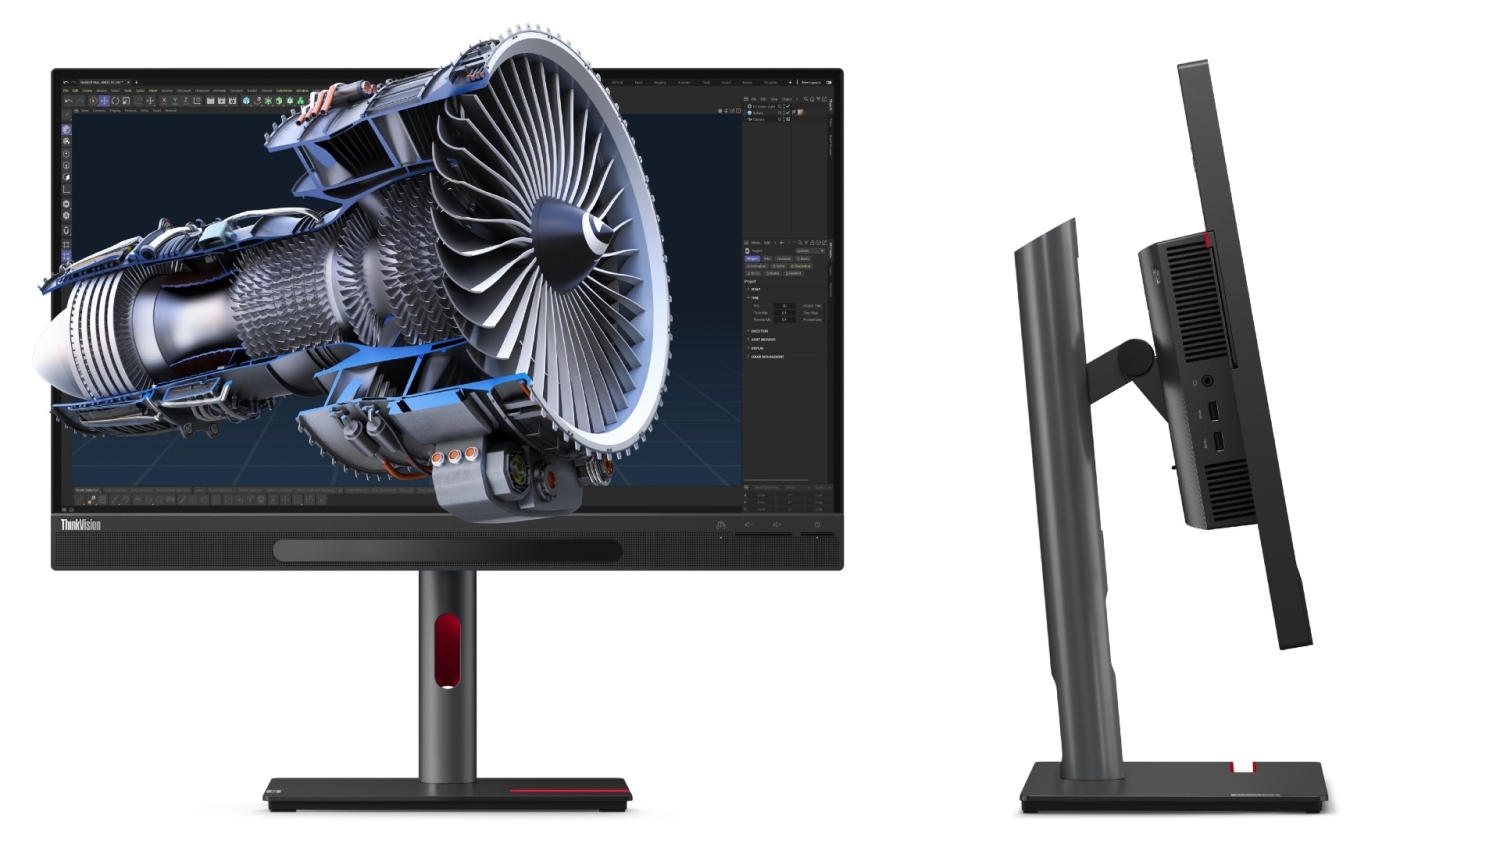 TweakTown Enlarged Image - The ThinkVision 27 3D Monitor from Lenovo, image credit: Lenovo.